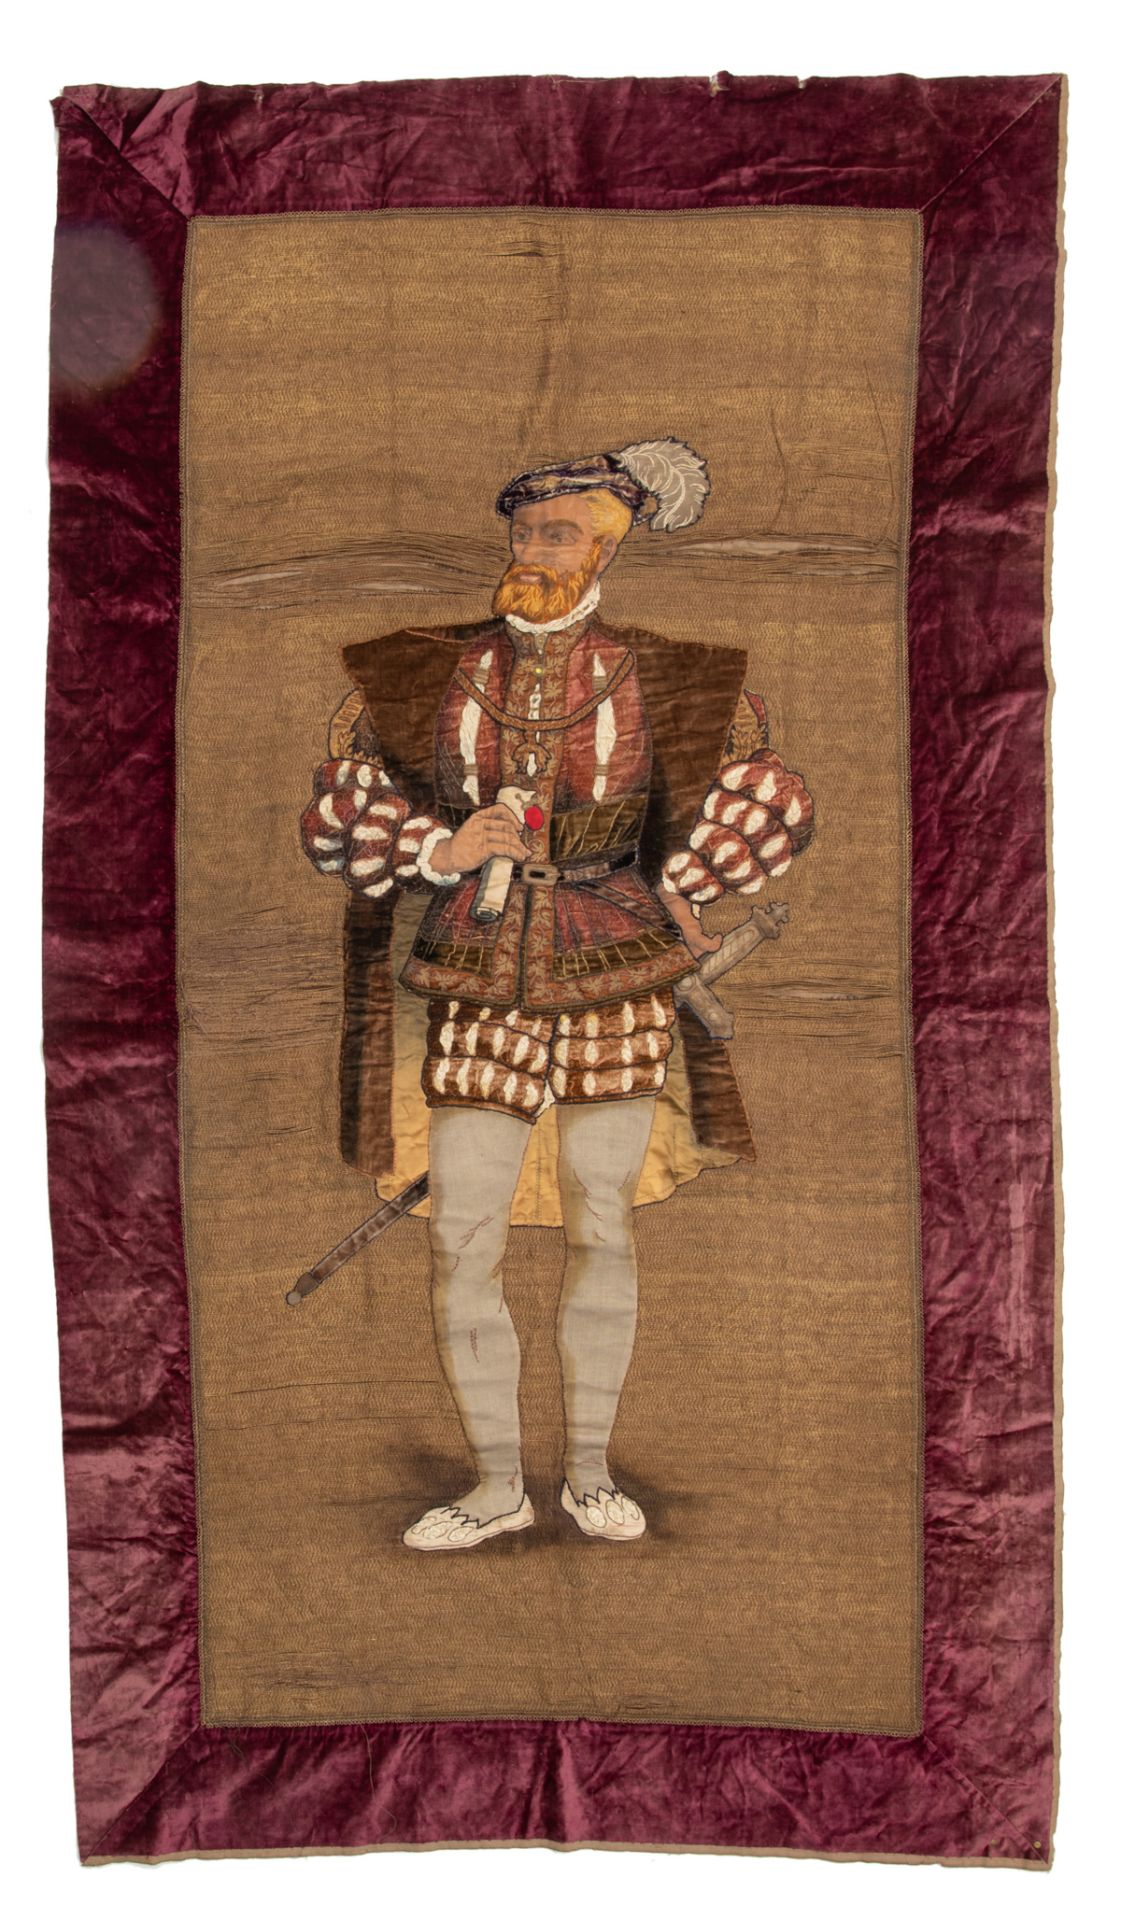 A portrait of Charles V, tapestry with details in various stitches and textiles, historism, 19thC, 1